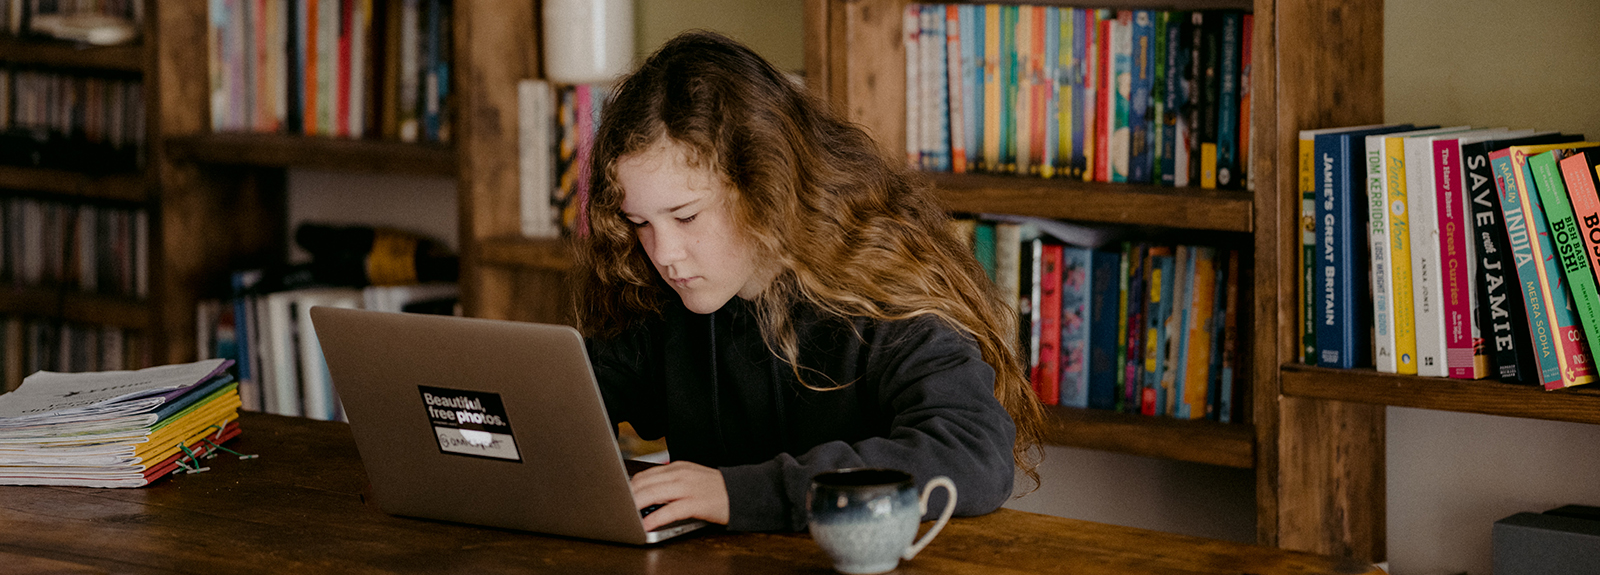 Teenager learning on a laptop